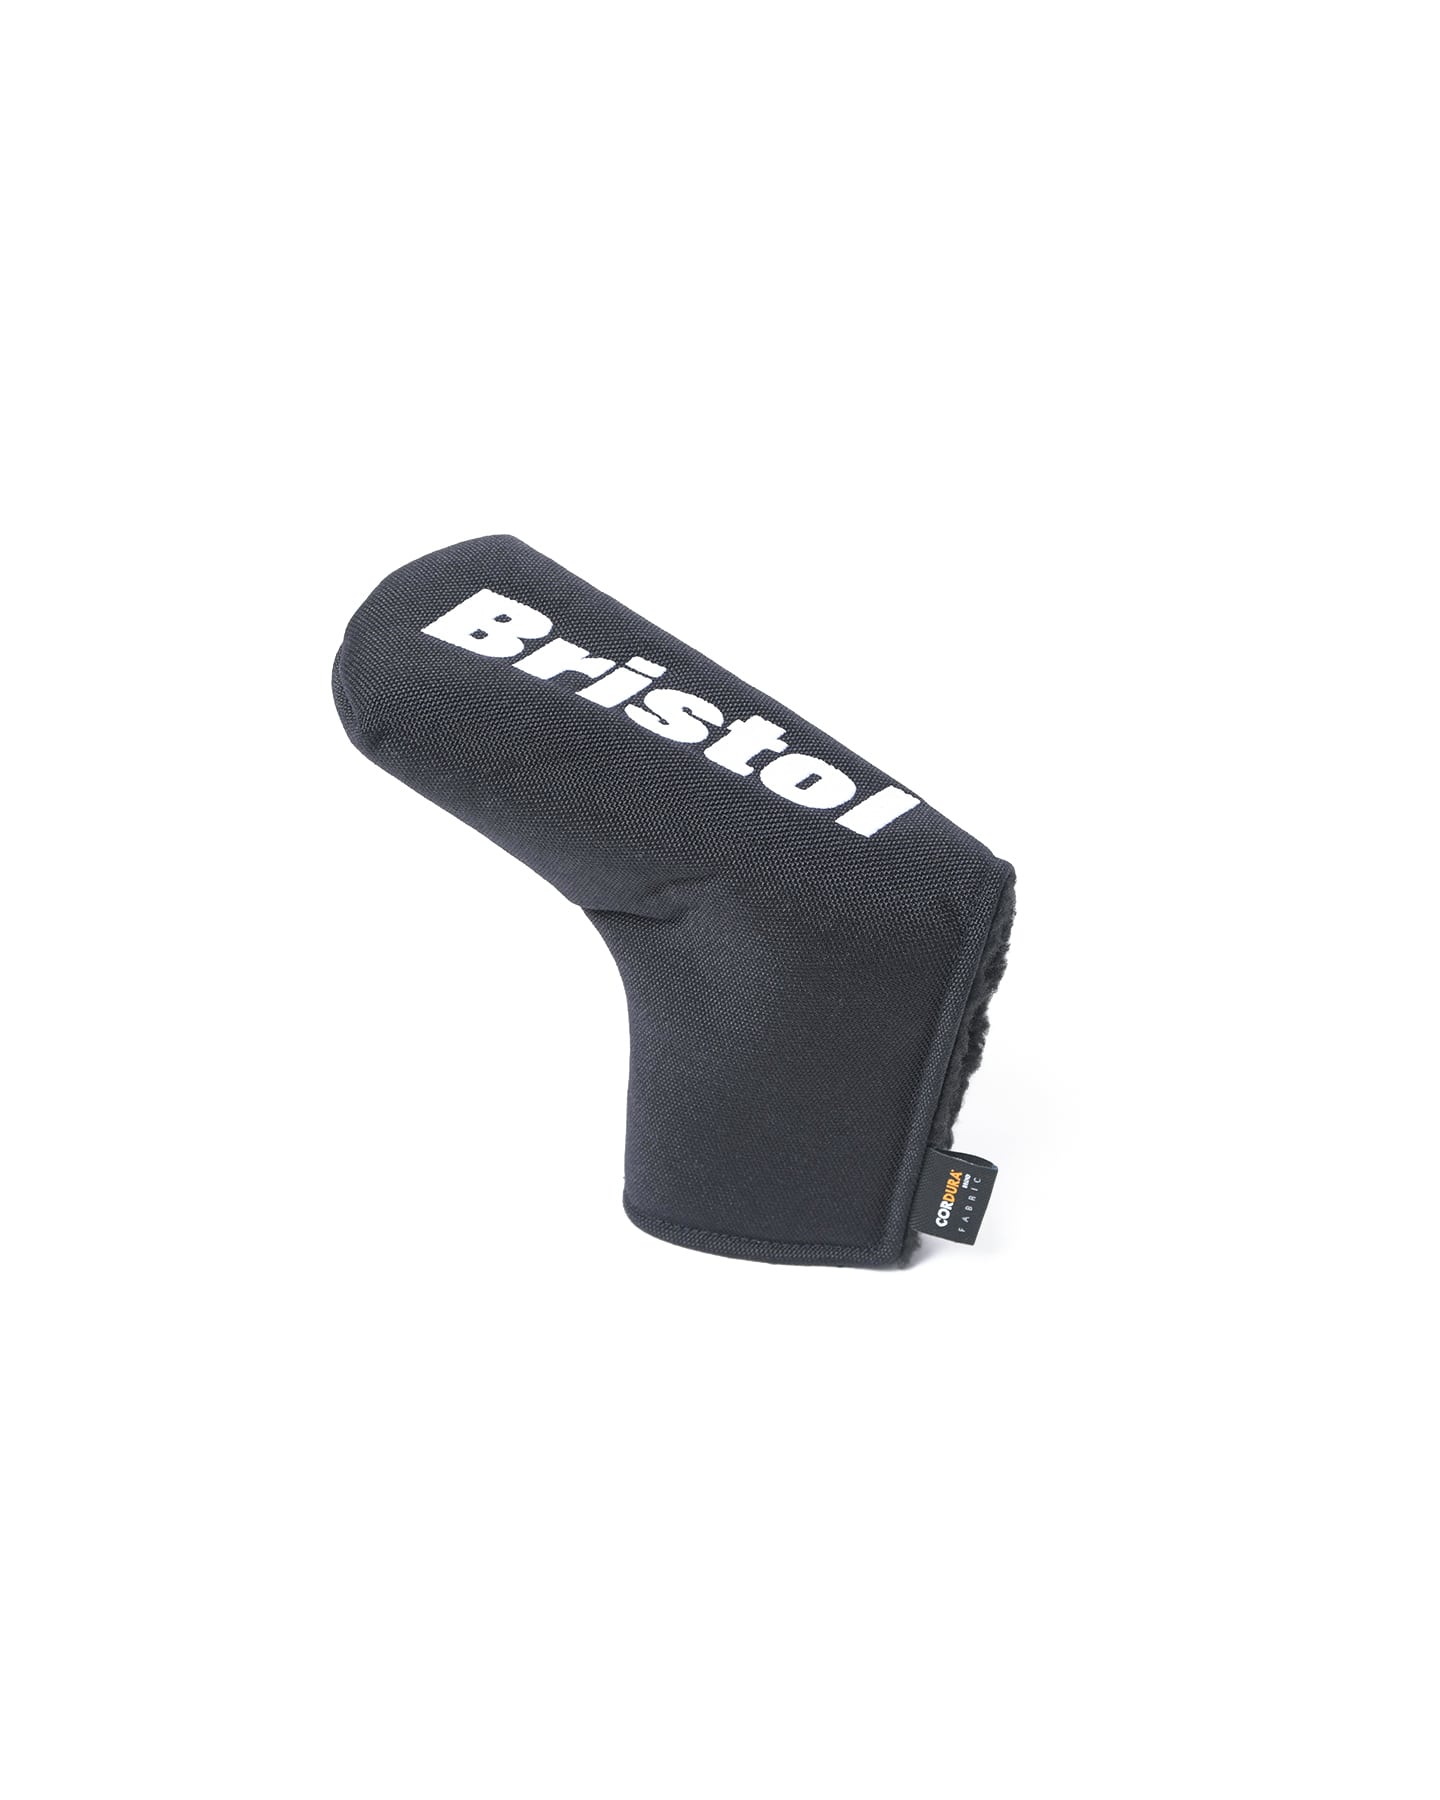 SOPH. | PUTTER HEAD COVER(FREE BLACK):